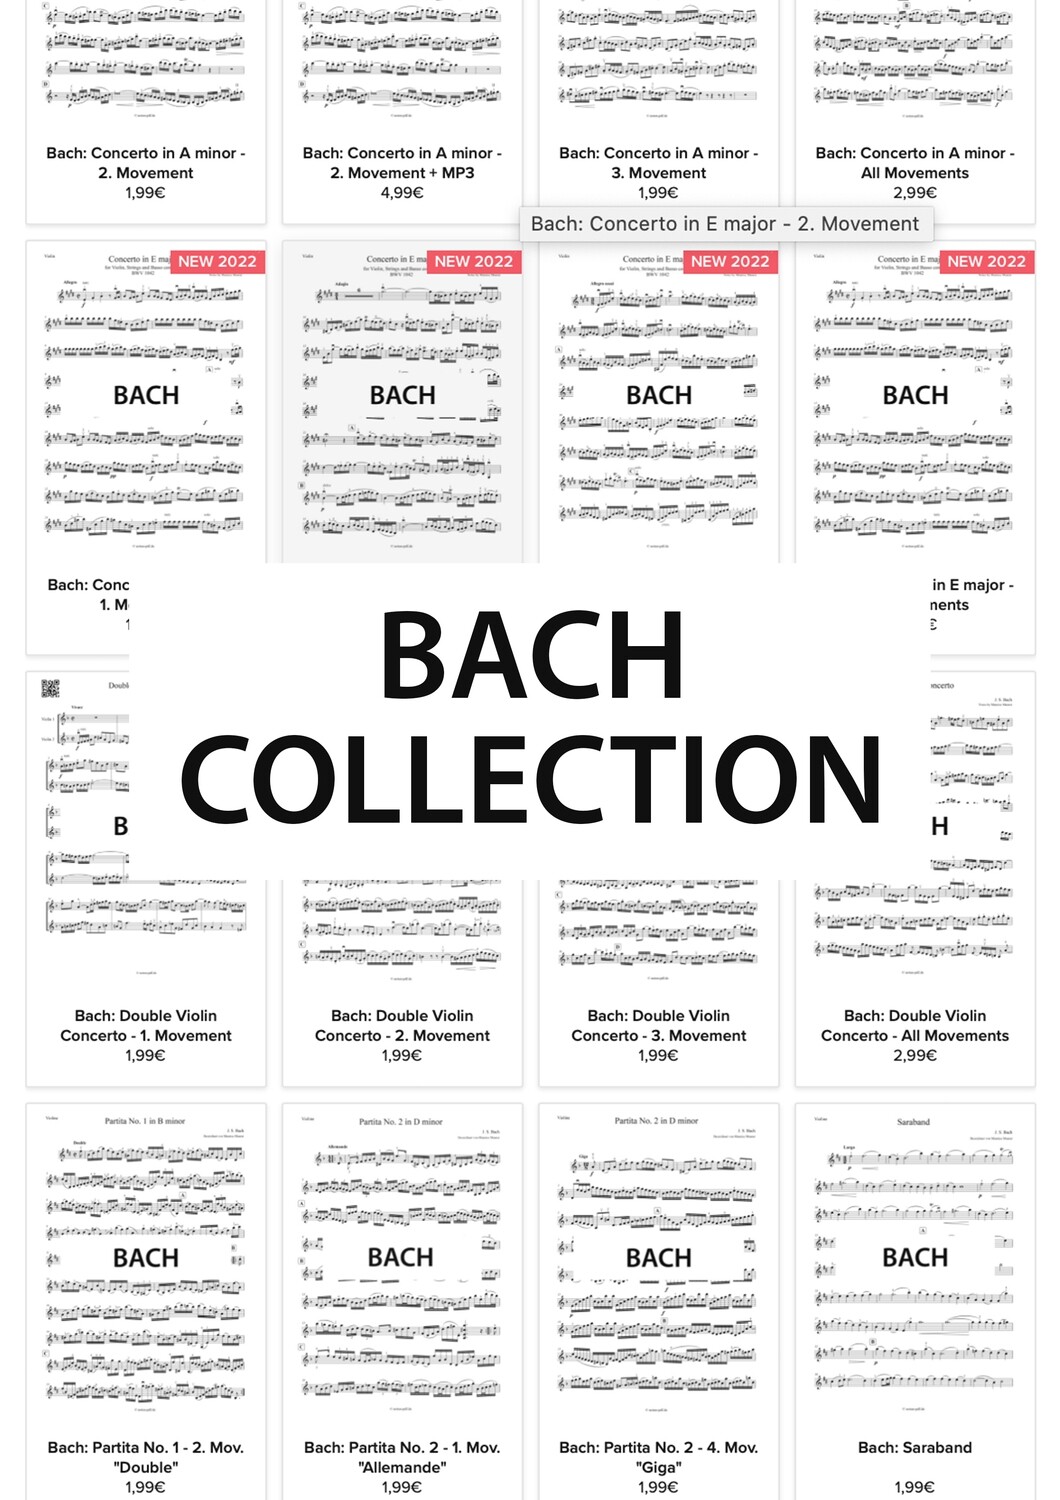 - BACH COLLECTION -